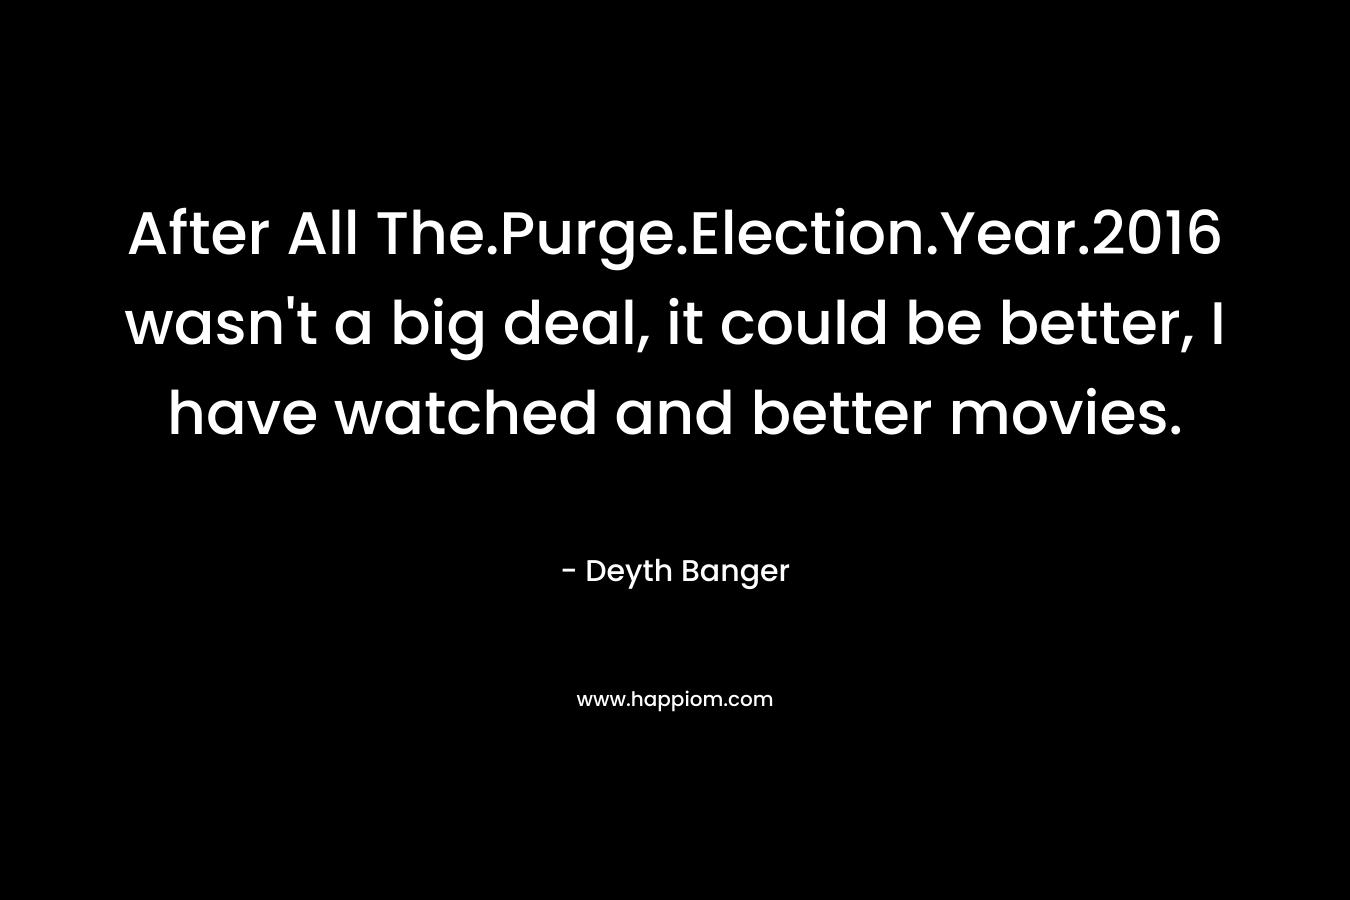 After All The.Purge.Election.Year.2016 wasn’t a big deal, it could be better, I have watched and better movies. – Deyth Banger